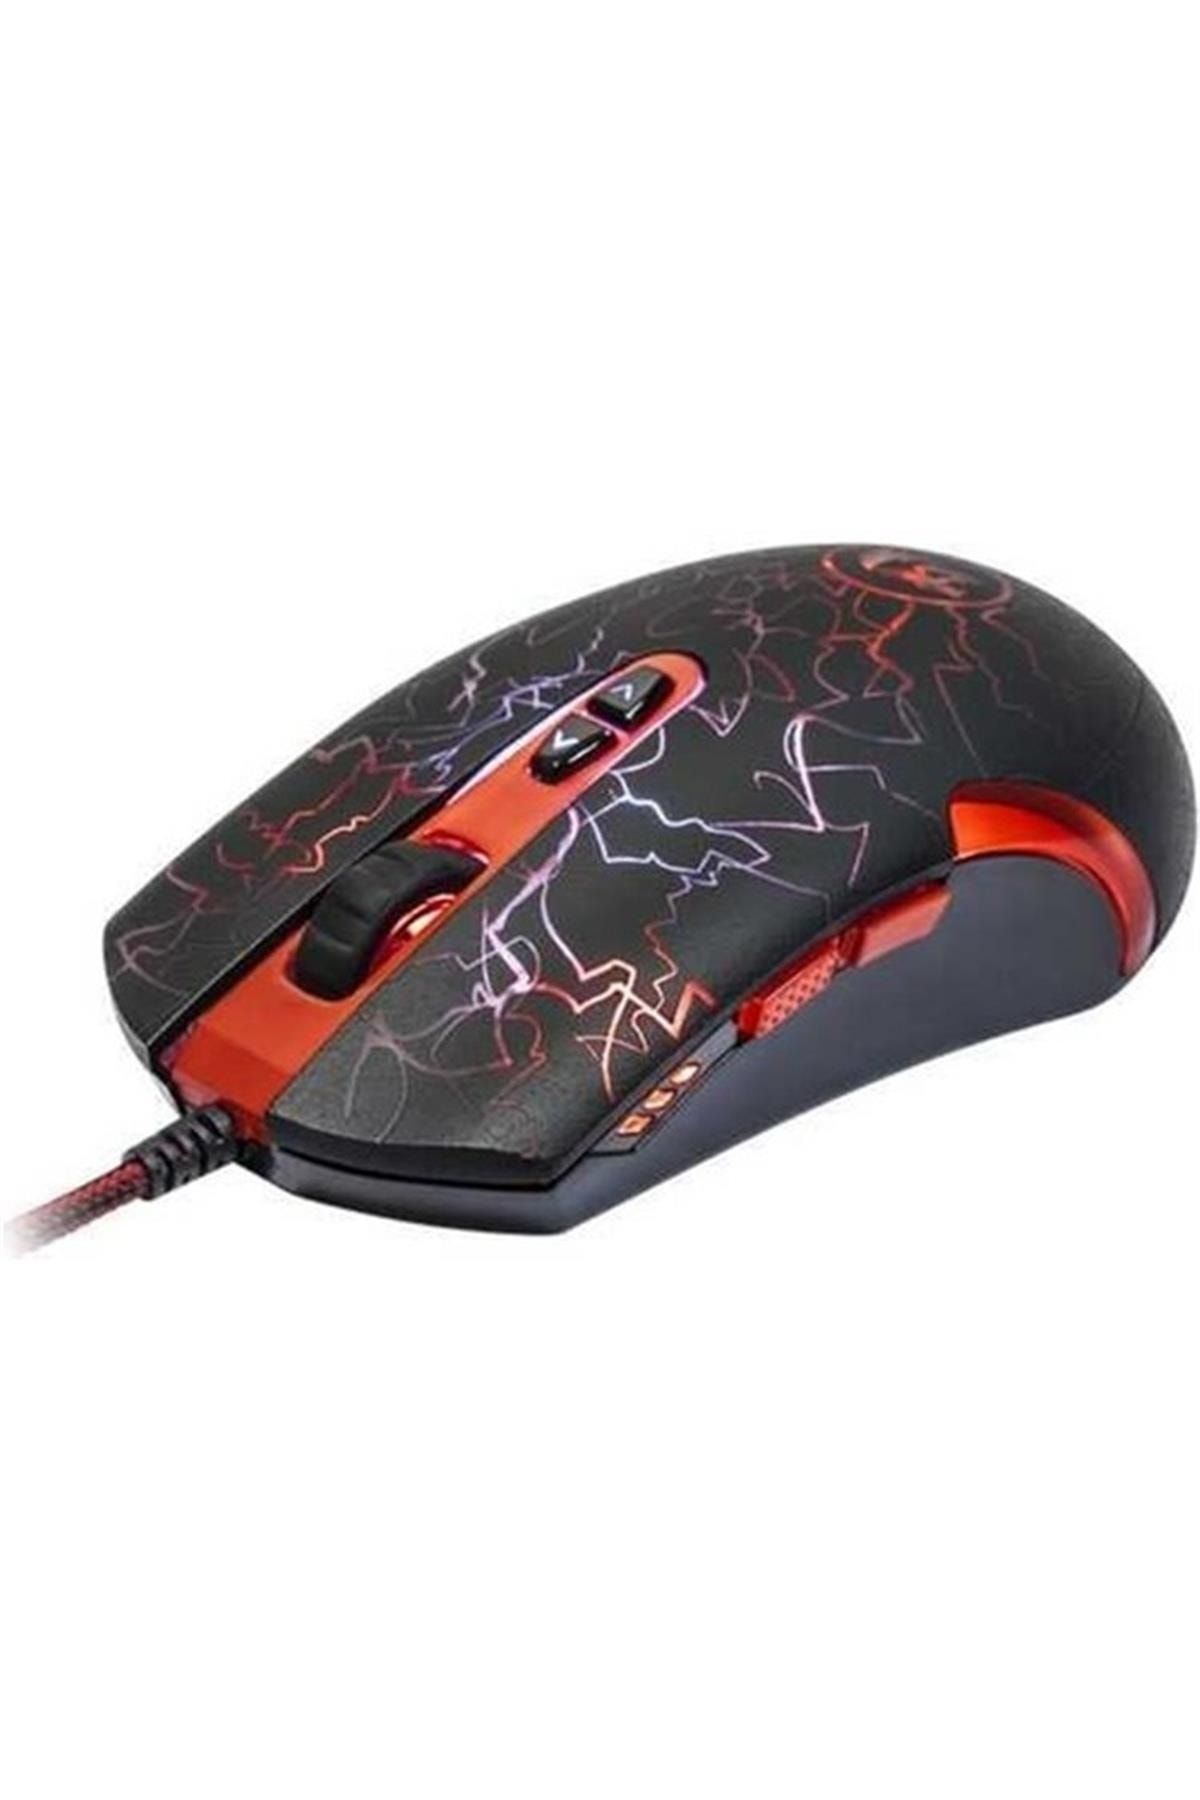 REDRAGON Lavavolf Gaming Mouse